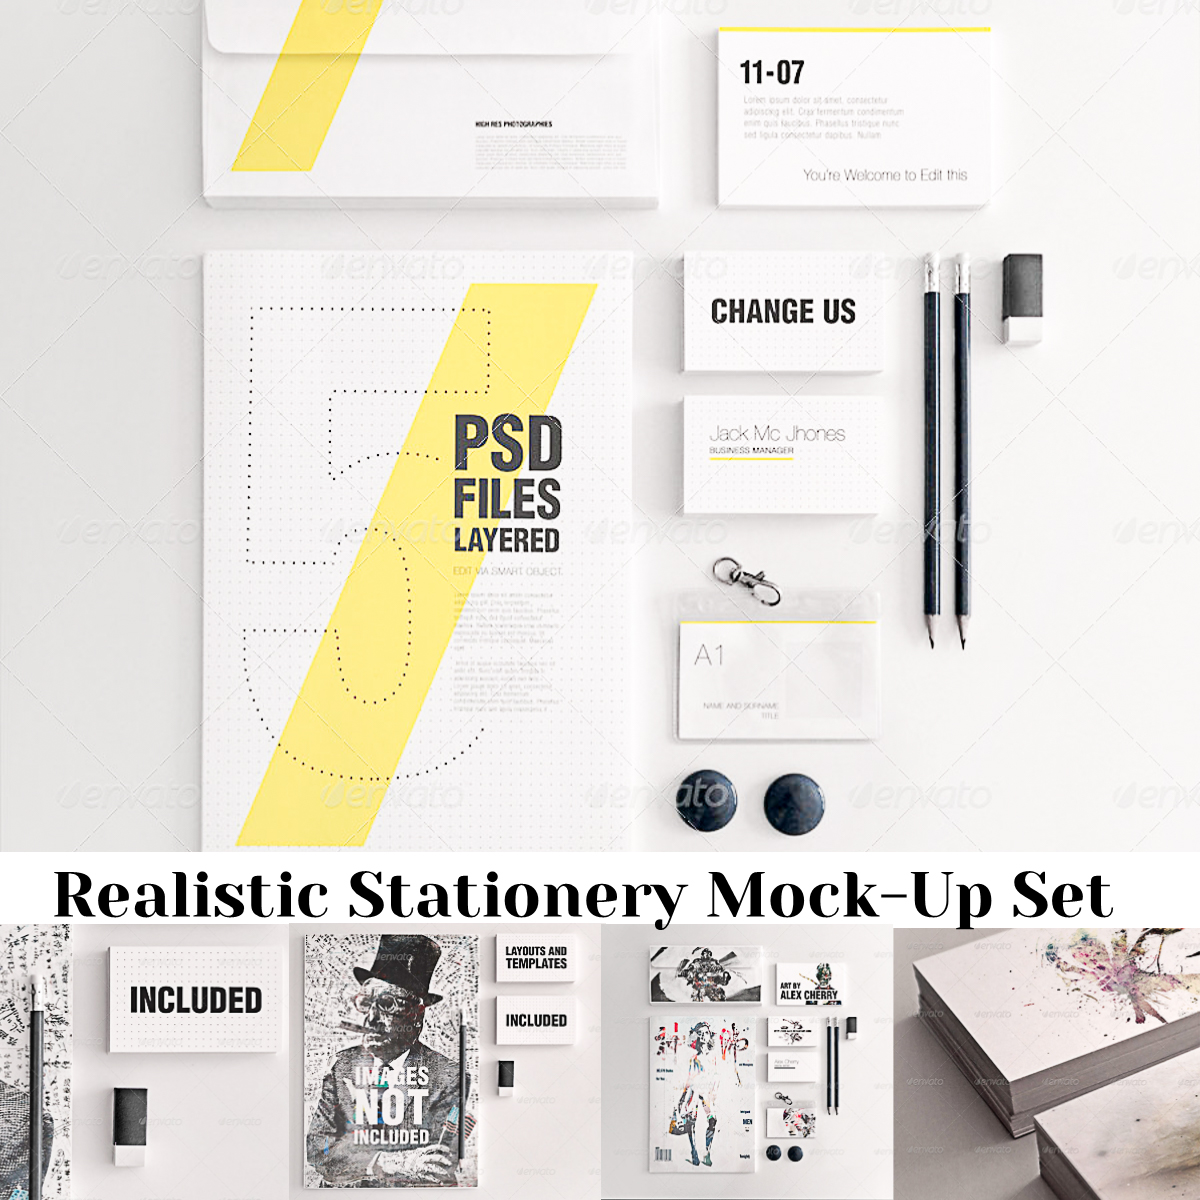 Download Realistic Stationery Mock-Up Set | Free download